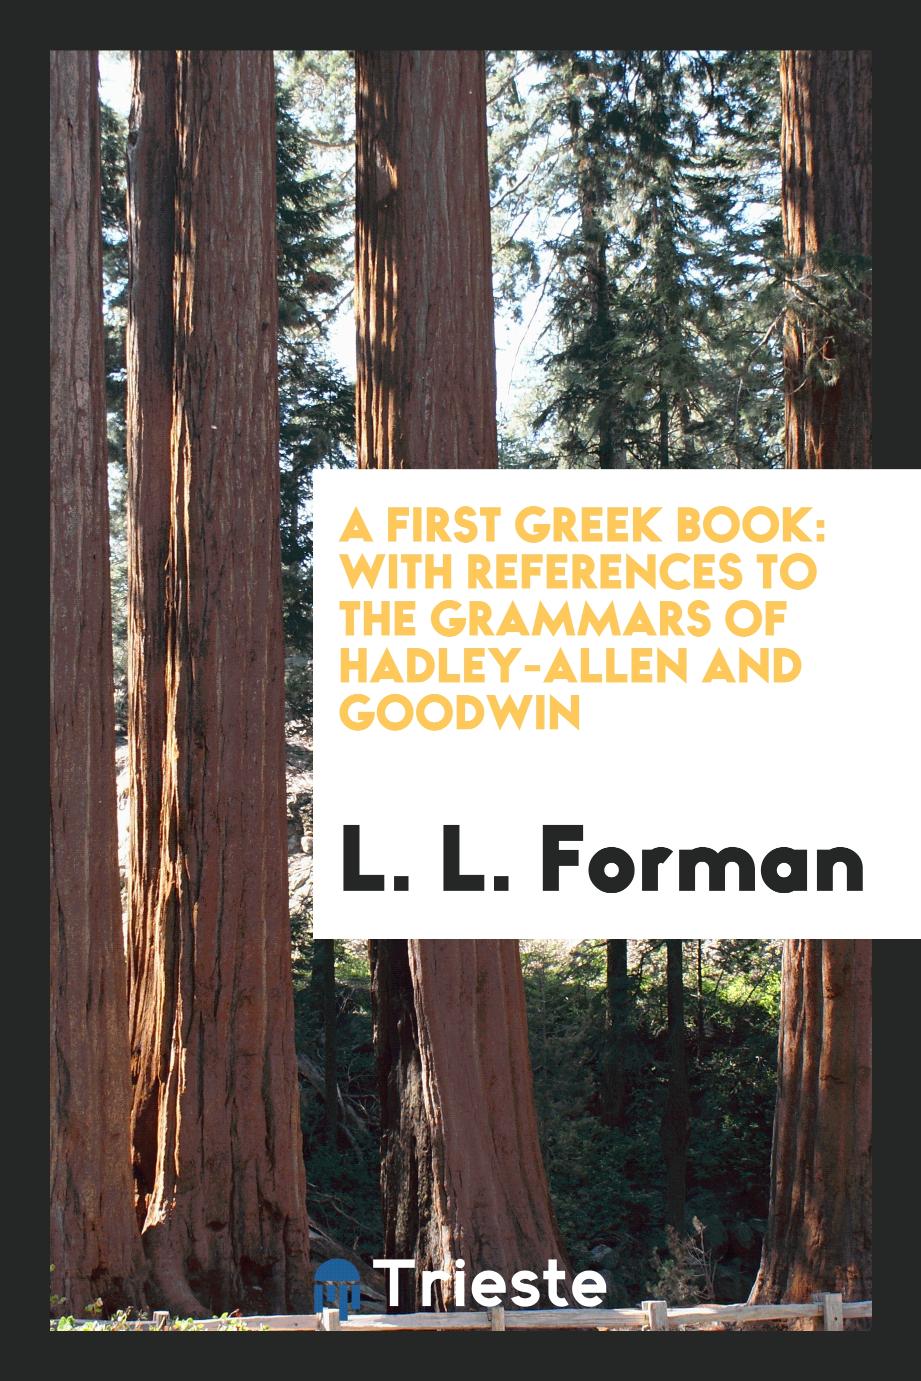 A First Greek Book: With References to the Grammars of Hadley-Allen and Goodwin